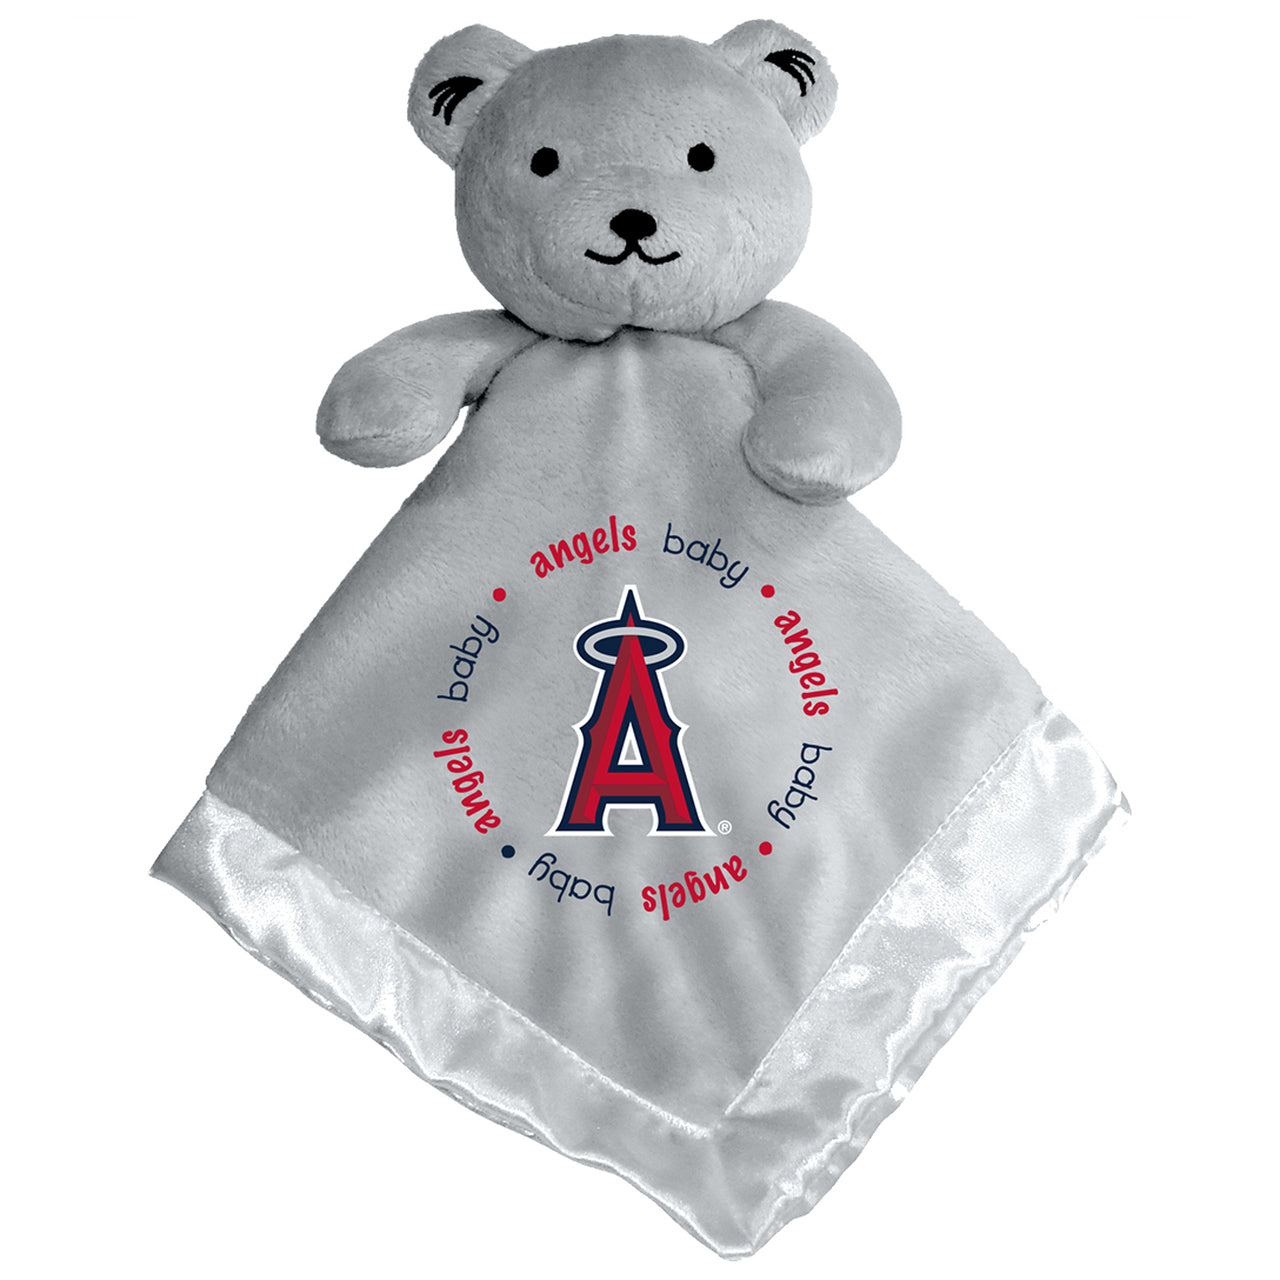 Los Angeles Angels Gray Embroidered Security Bear by Masterpieces Inc.